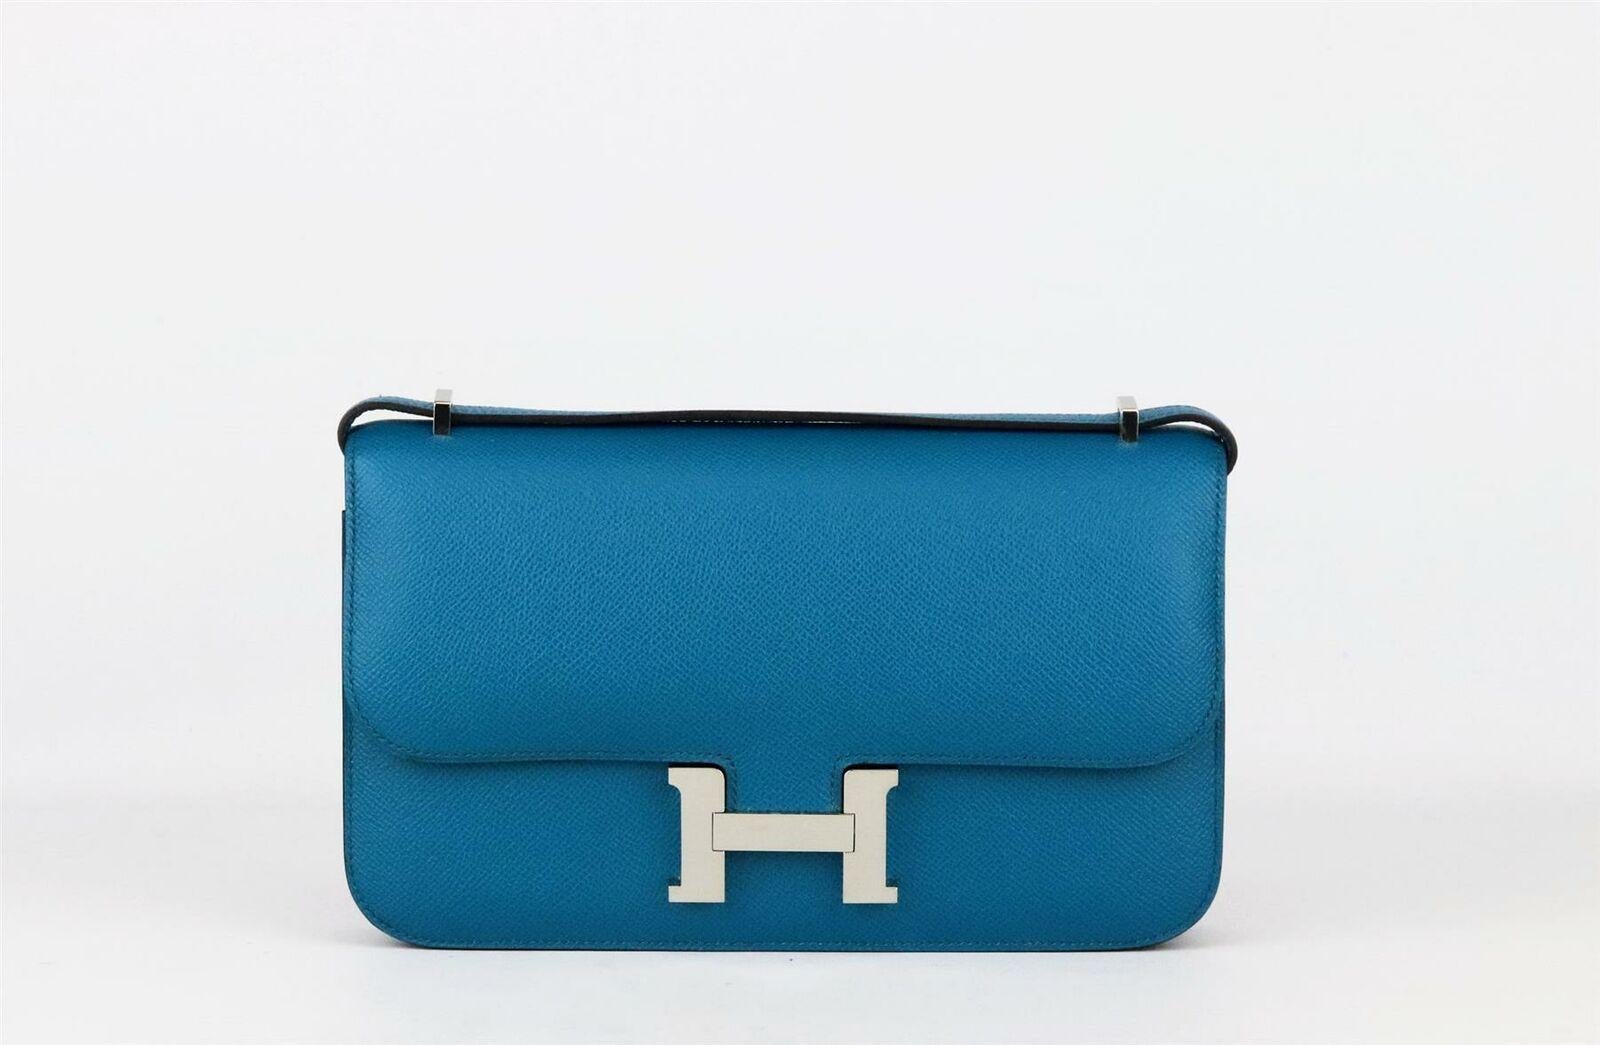 Made in France, this beautiful 2014 Hermès ‘Constance Elan’ handbag has been made from textured Epsom leather exterior in a teal/turquoise hue and soft leather interior, it is decorated with palladium hardware on the front and finished with a flat